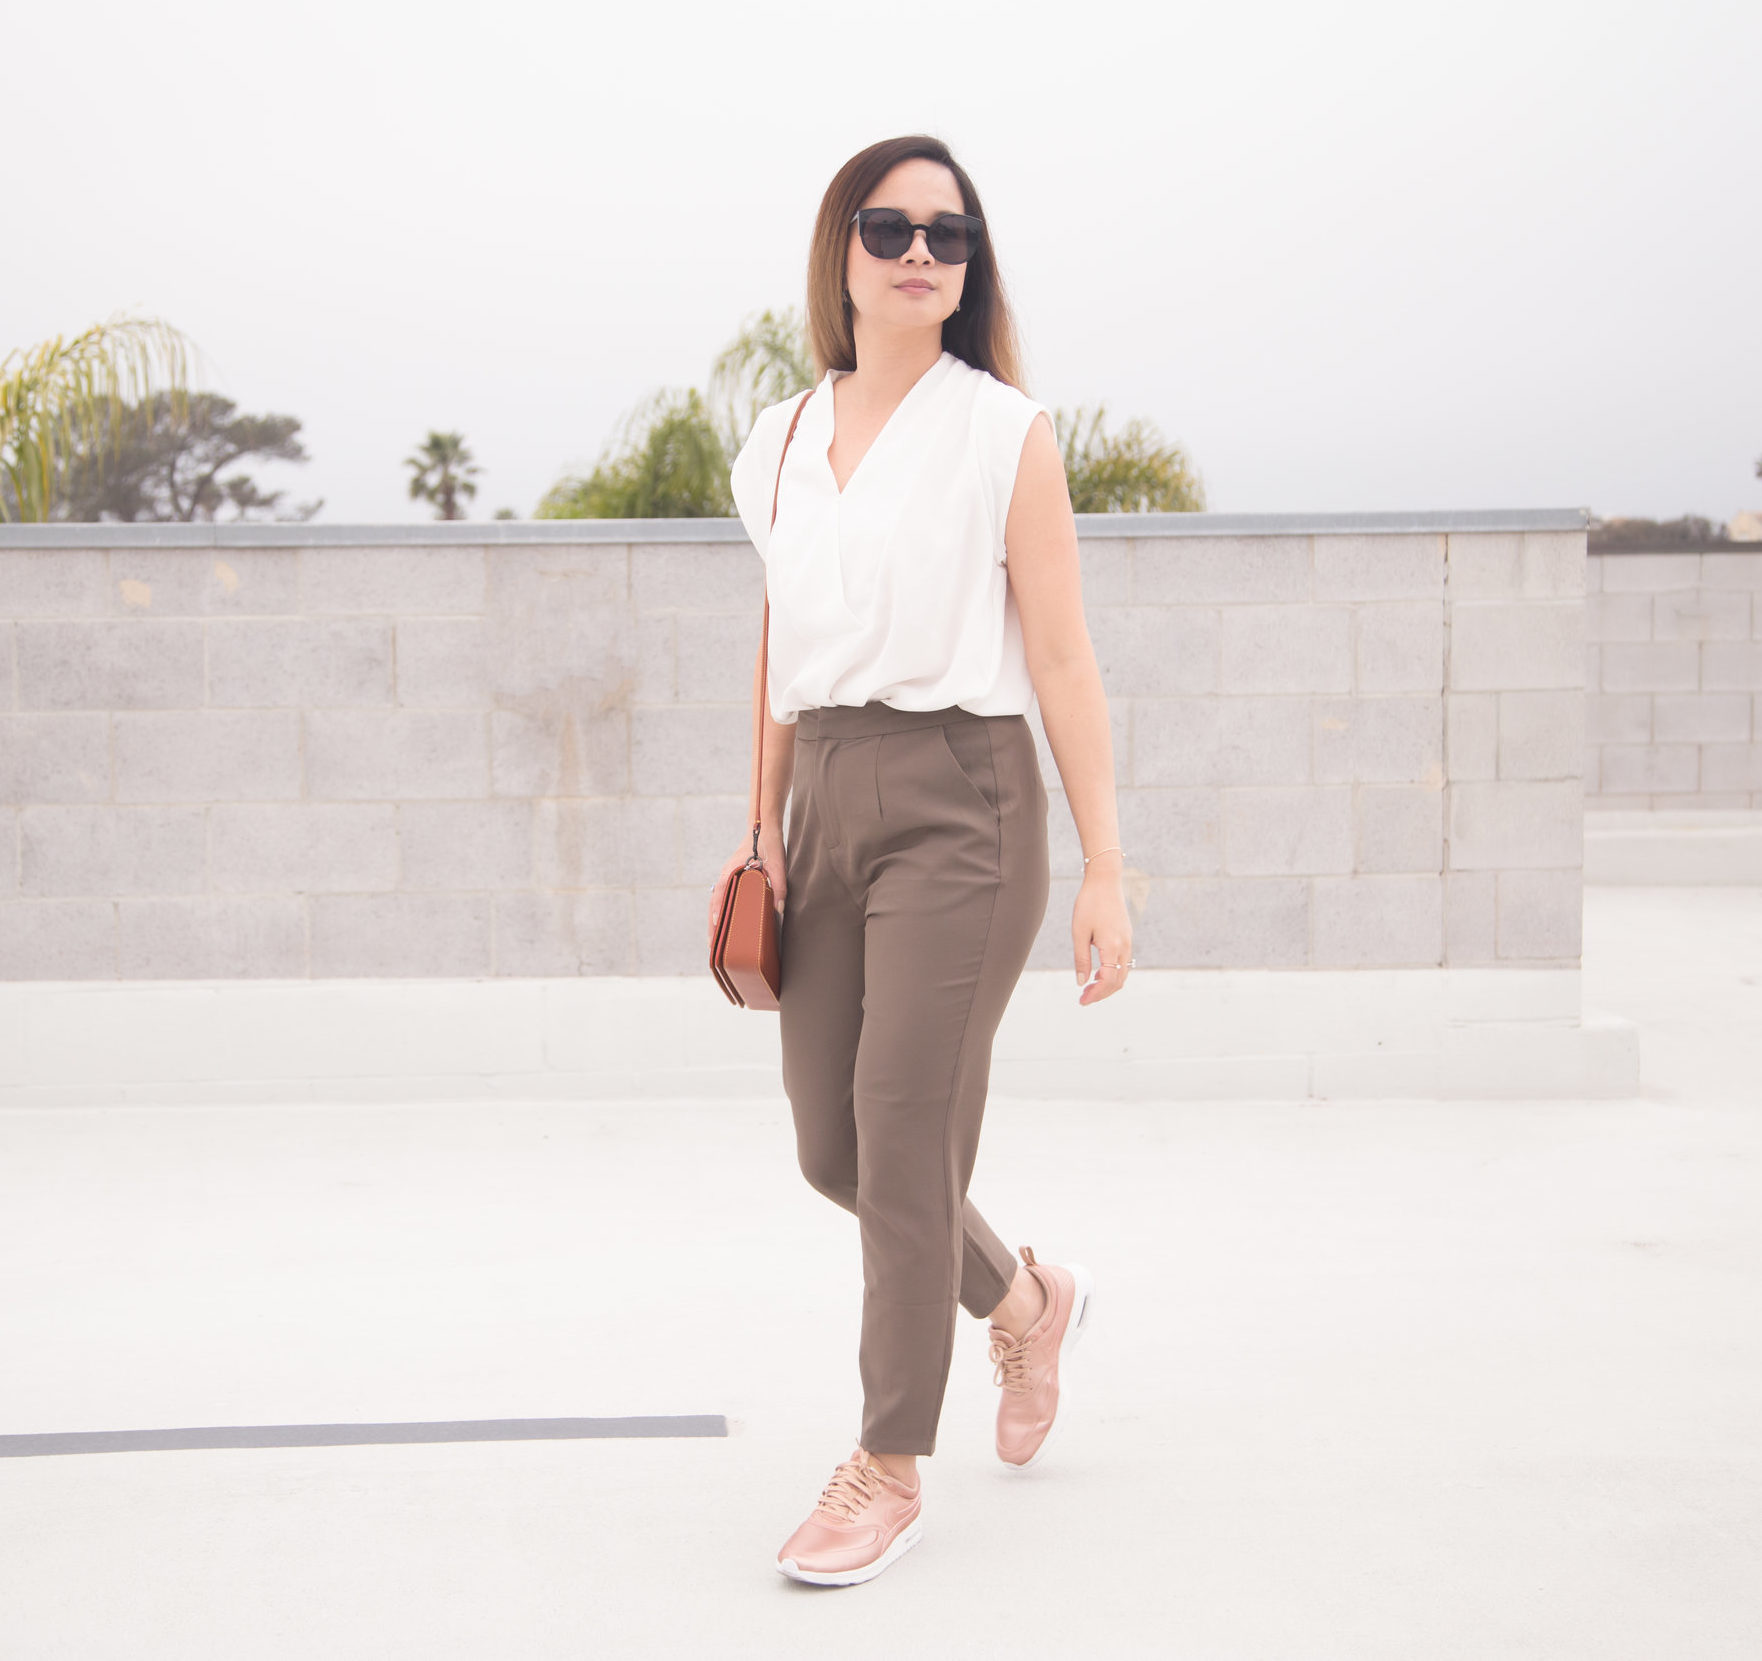 Having A Capsule Wardrobe For Work || Three Looks To Create Right Now